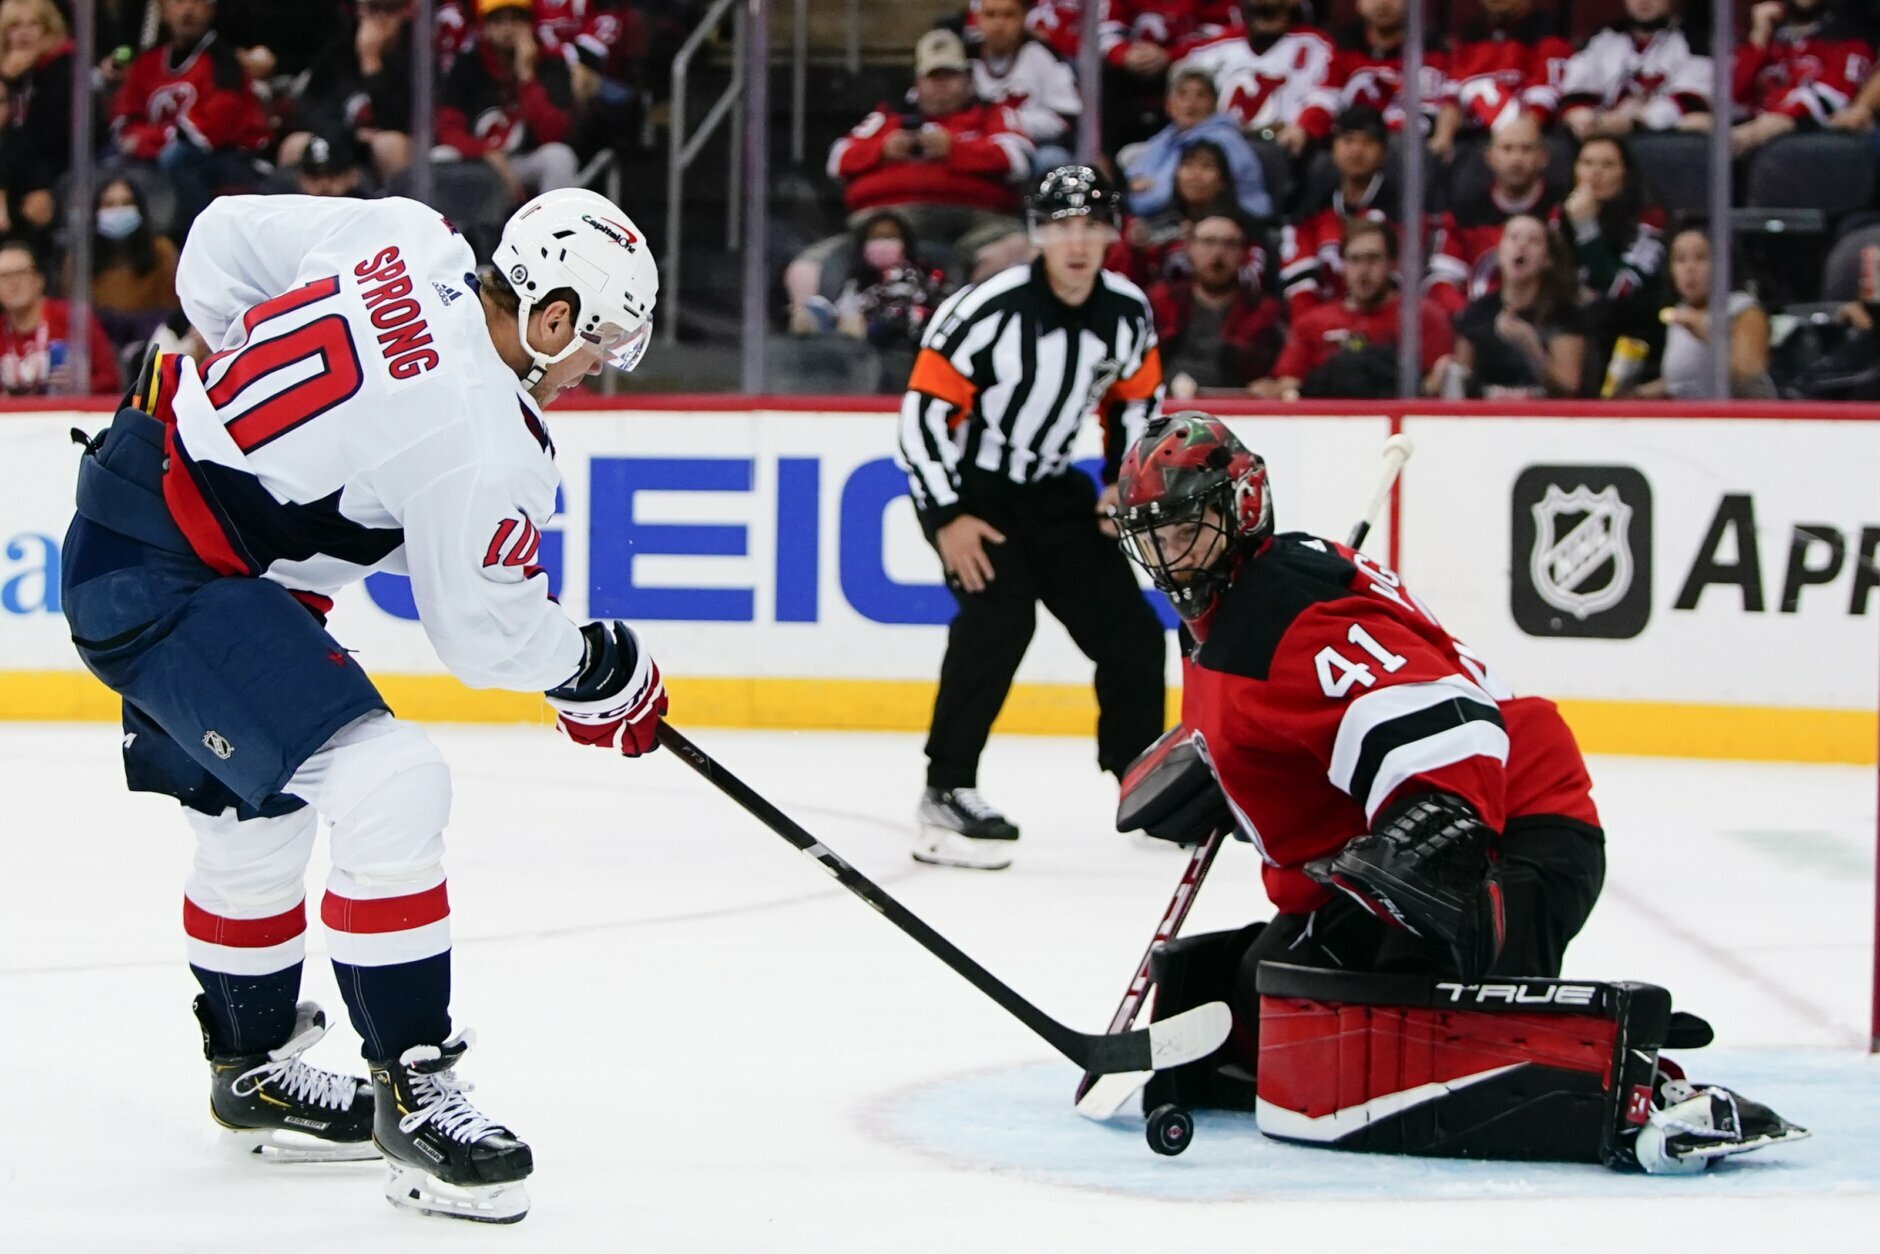 Washington Capitals' Daniel Sprong (10) shoots the puck past New Jersey Devils goaltender Scott Wedgewood (41) for a goal during the second period of an NHL hockey game Thursday, Oct. 21, 2021, in Newark, N.J. (AP Photo/Frank Franklin II)